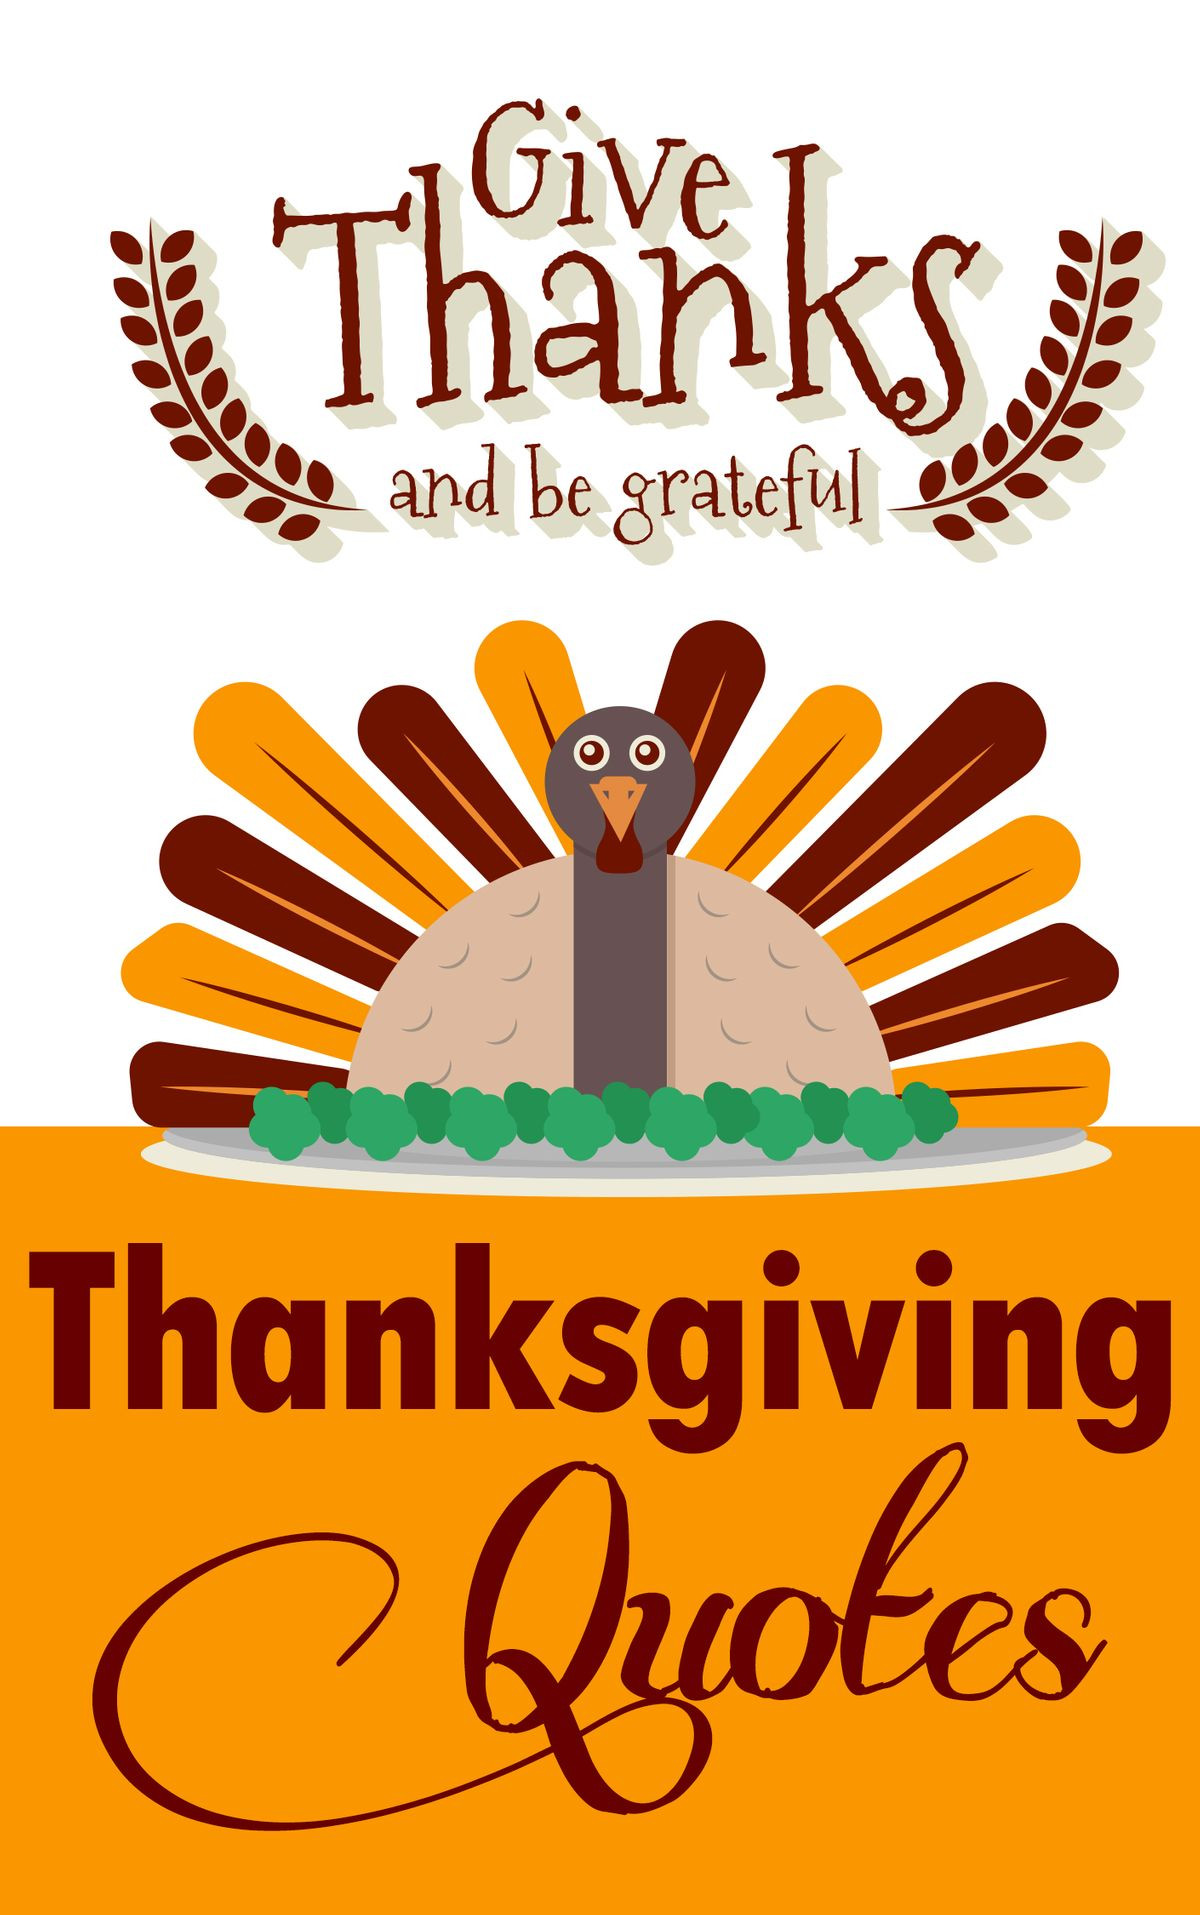 Thanksgiving Quotes Food
 Thanksgiving Quotes Give Thanks And Be Grateful